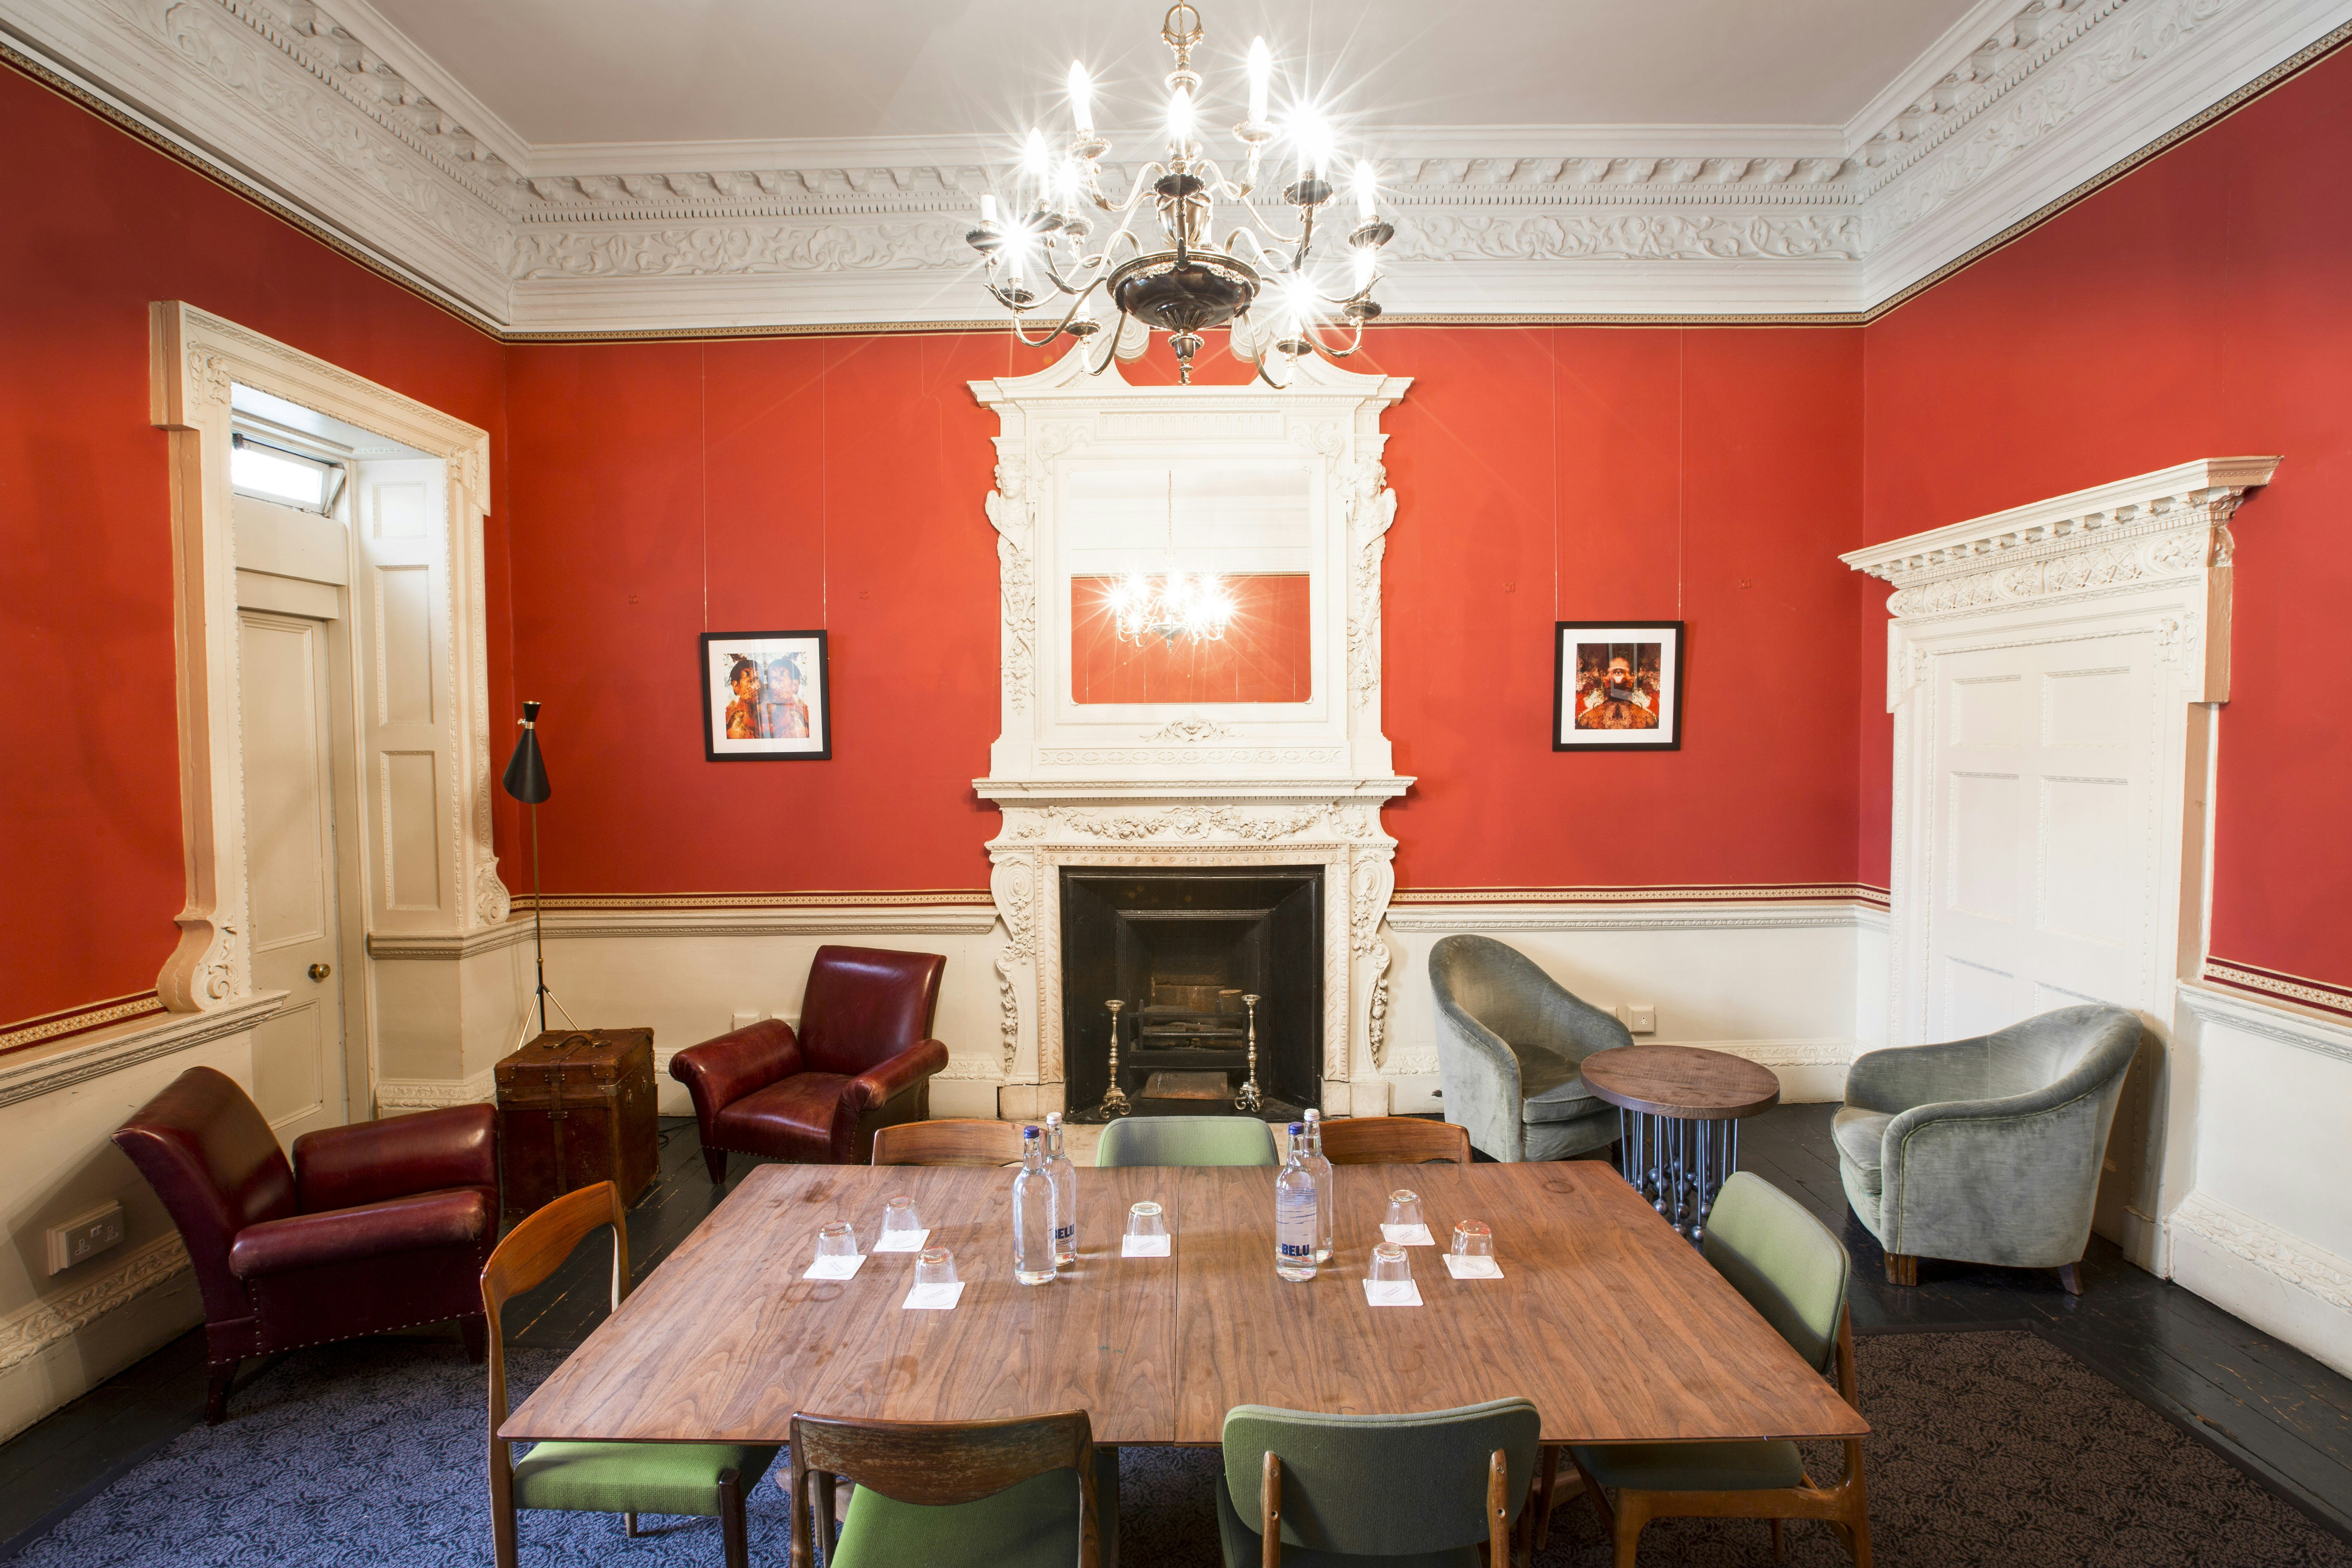 The House of St Barnabas - First Floor image 6